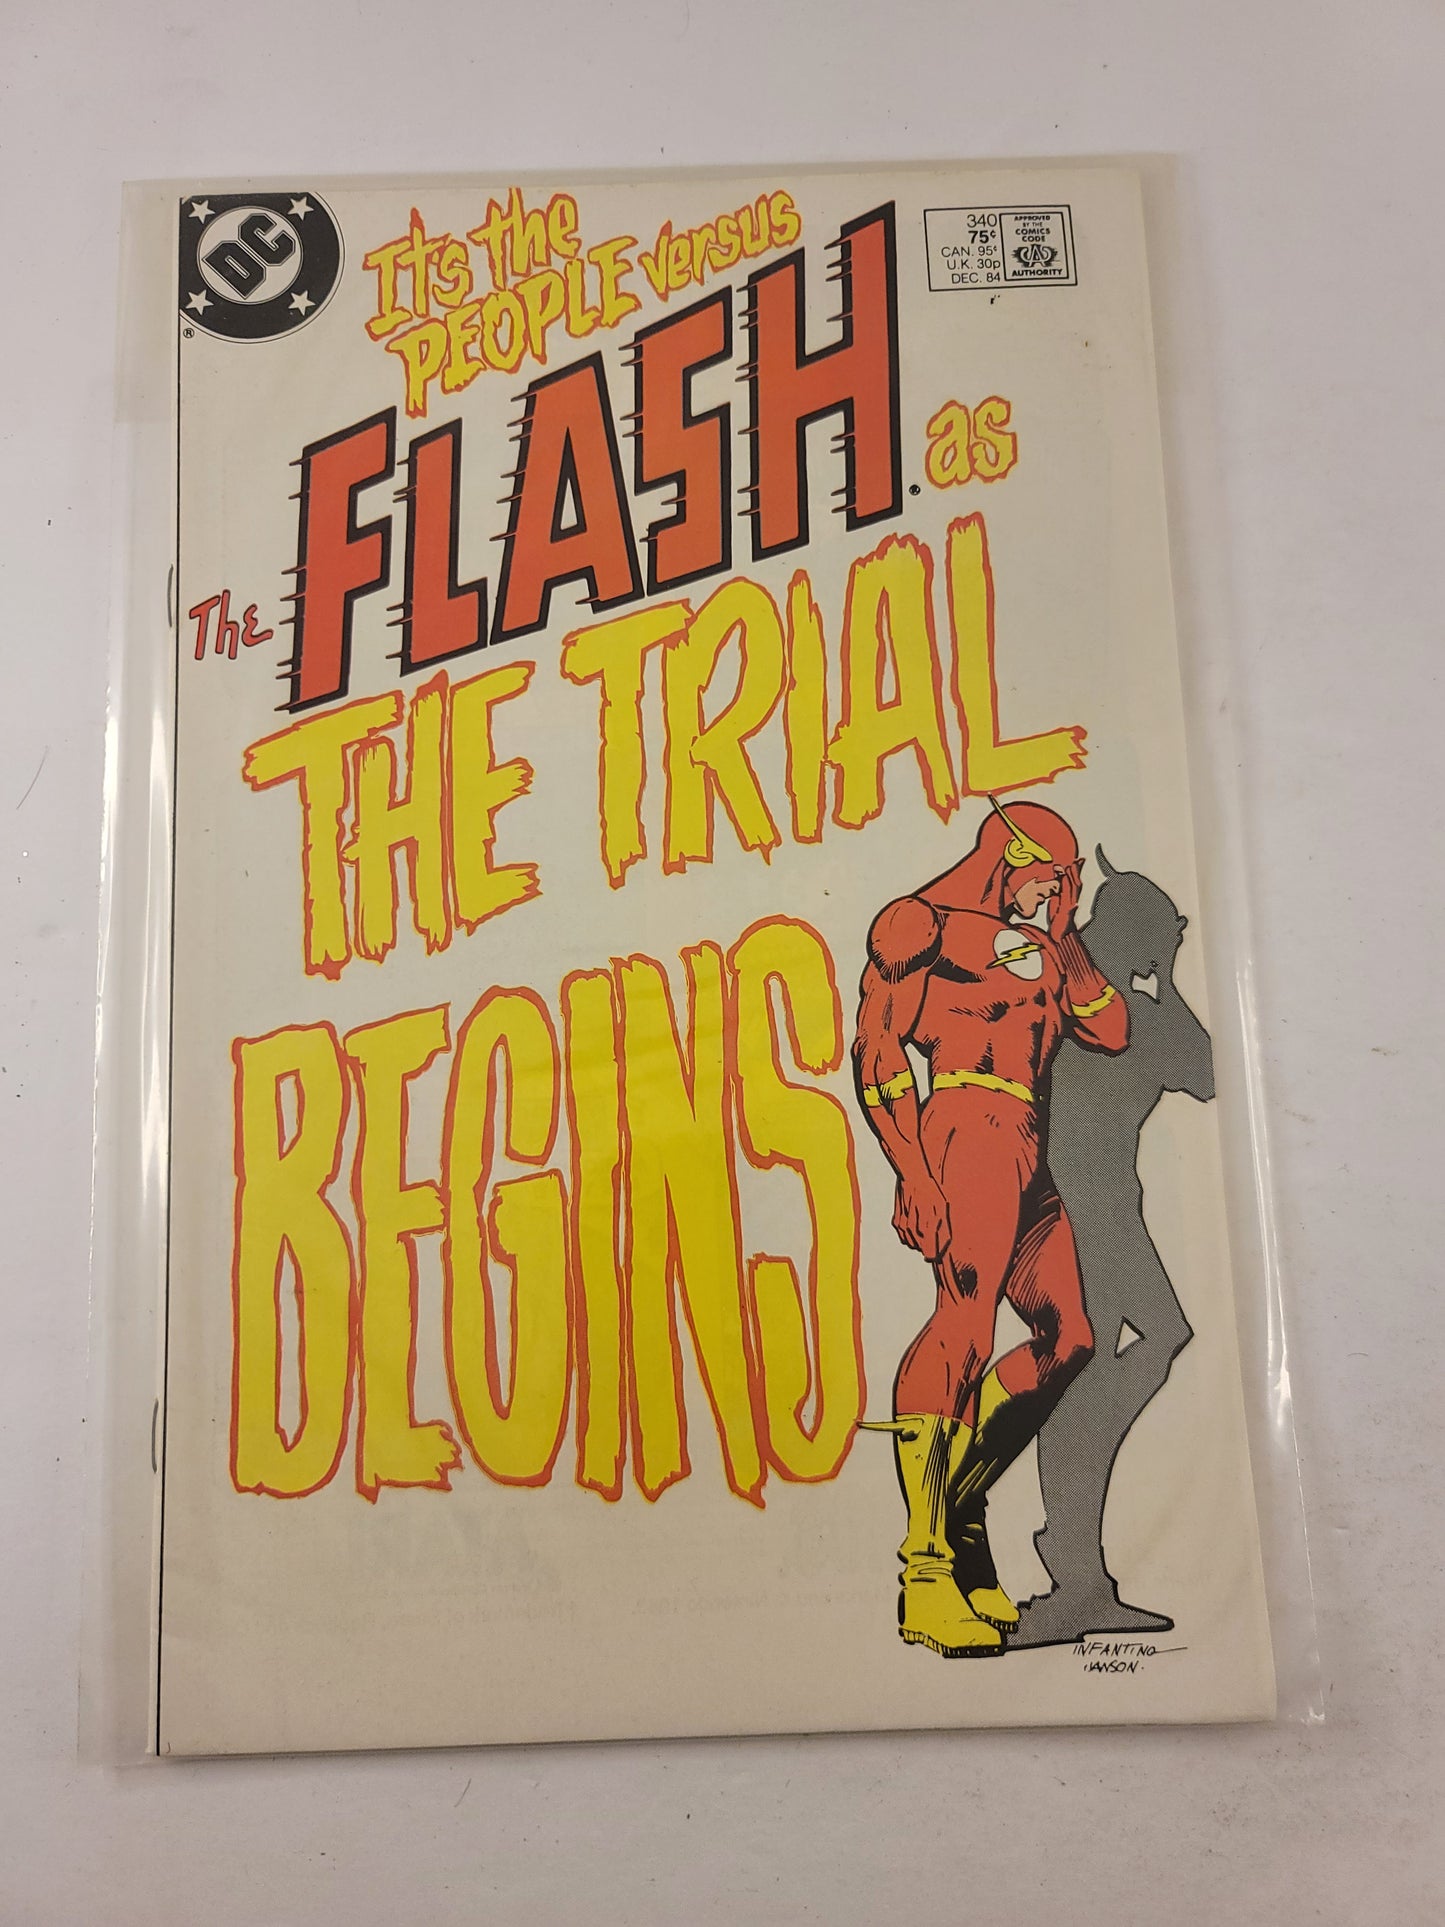 The Flash Volume 1 Issues 340 341 342 343 344 345 346 347 348 349